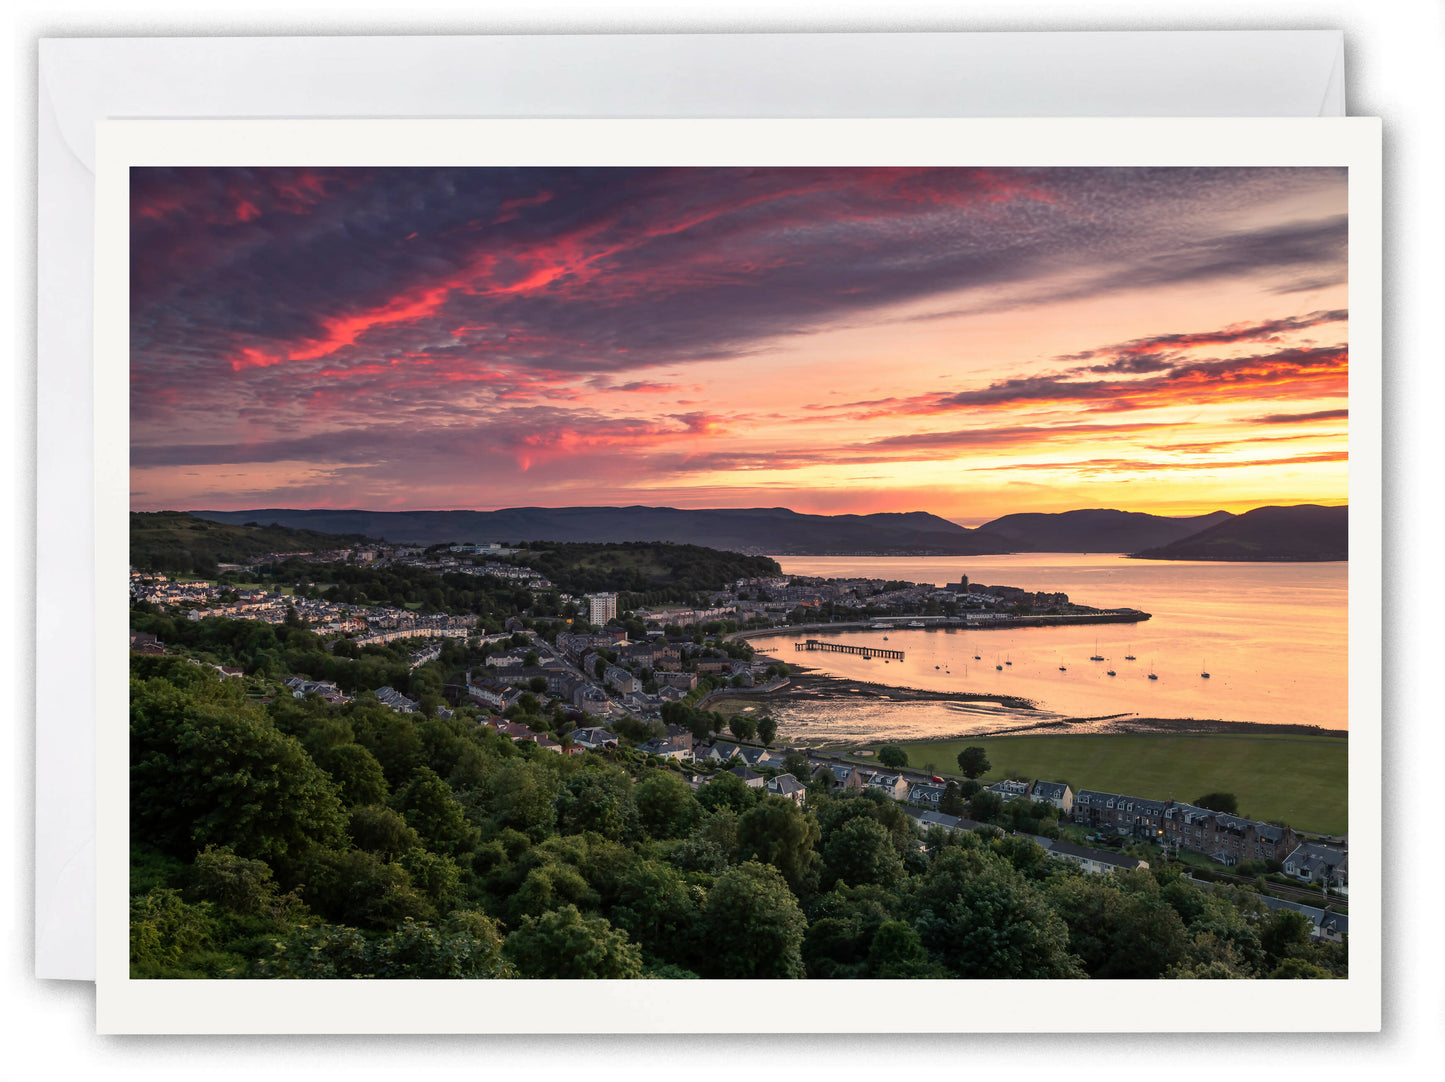 Gourock & Firth of Clyde - Scotland Greeting Card - Blank Inside